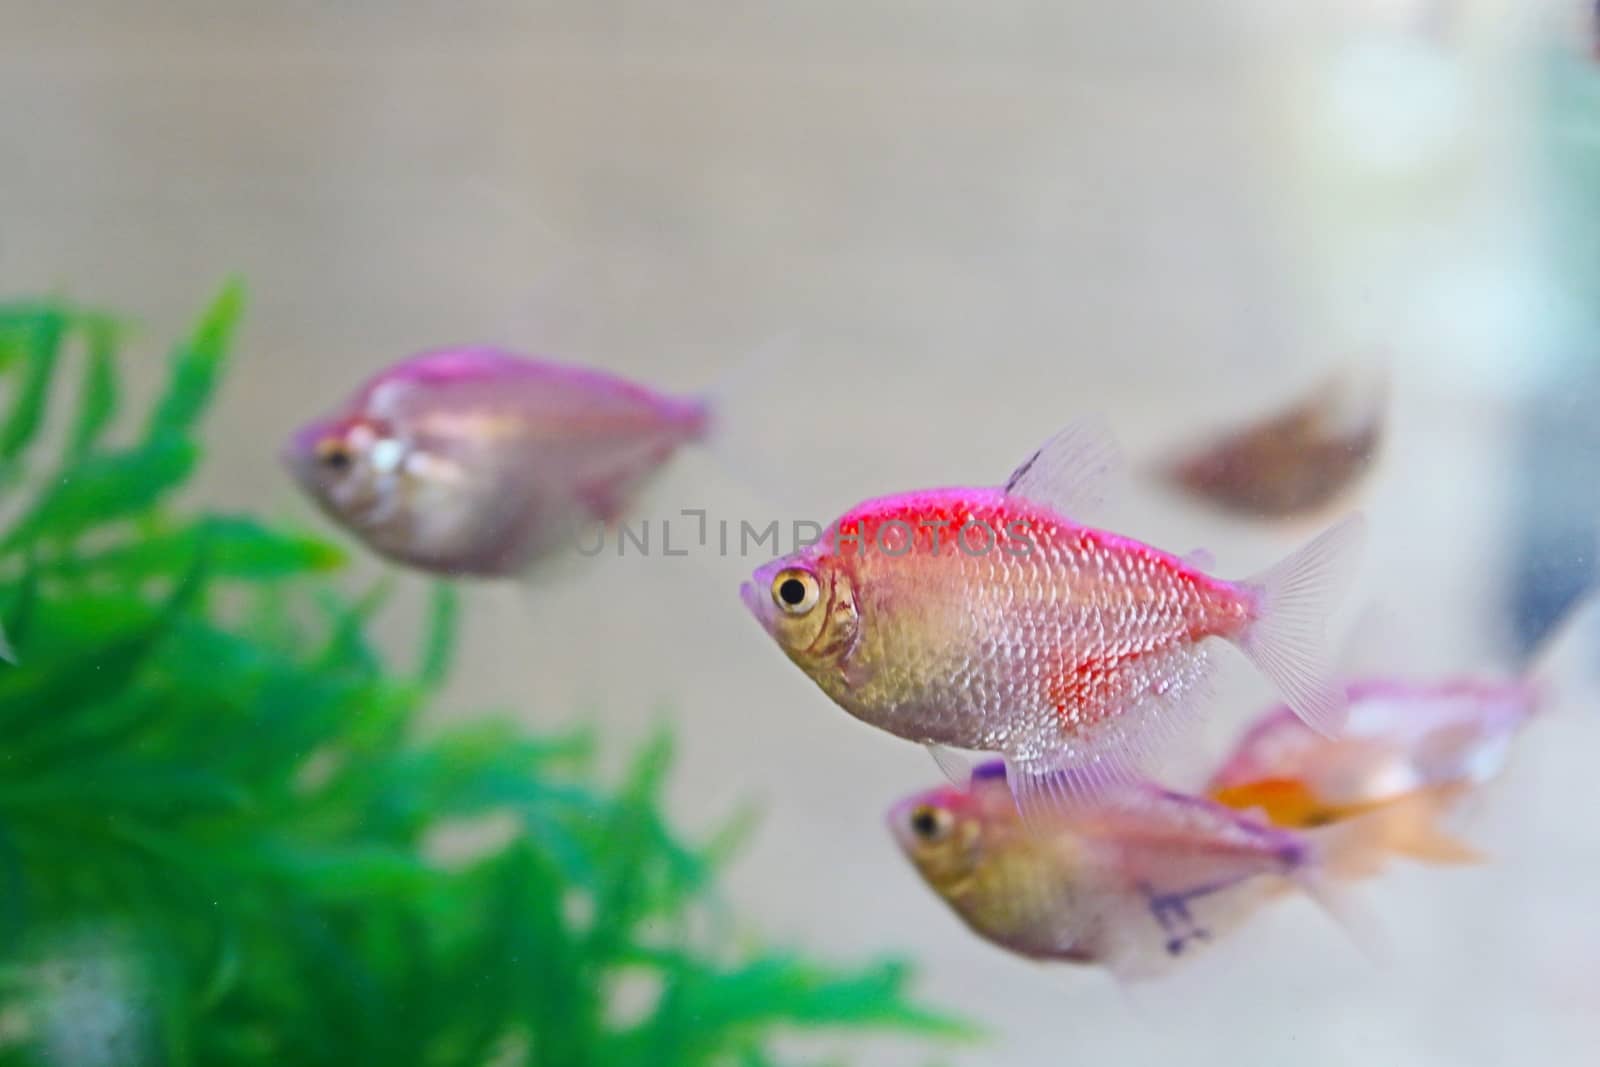 All Beautiful and Colorful Discus Fish Species in Aquarium fish, brought to us from the waters of the Amazon